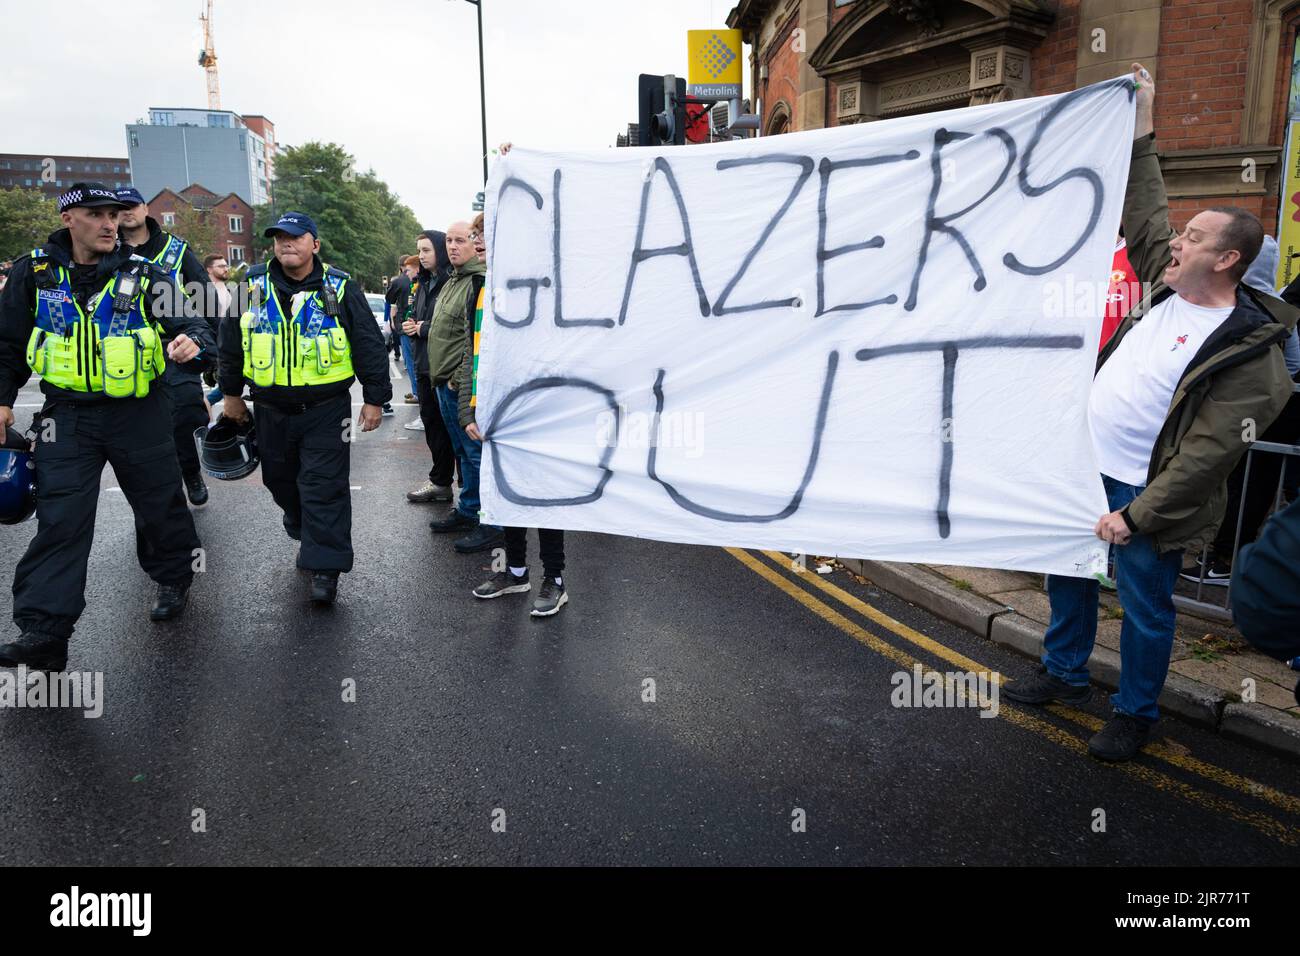 Manchester, UK. 22nd Aug, 2022. Man United fans await the start of the march to Old Trafford ahead of their game against Liverpool. The protests continue against the Glazers ownership of the club. Credit: Andy Barton/Alamy Live News Stock Photo